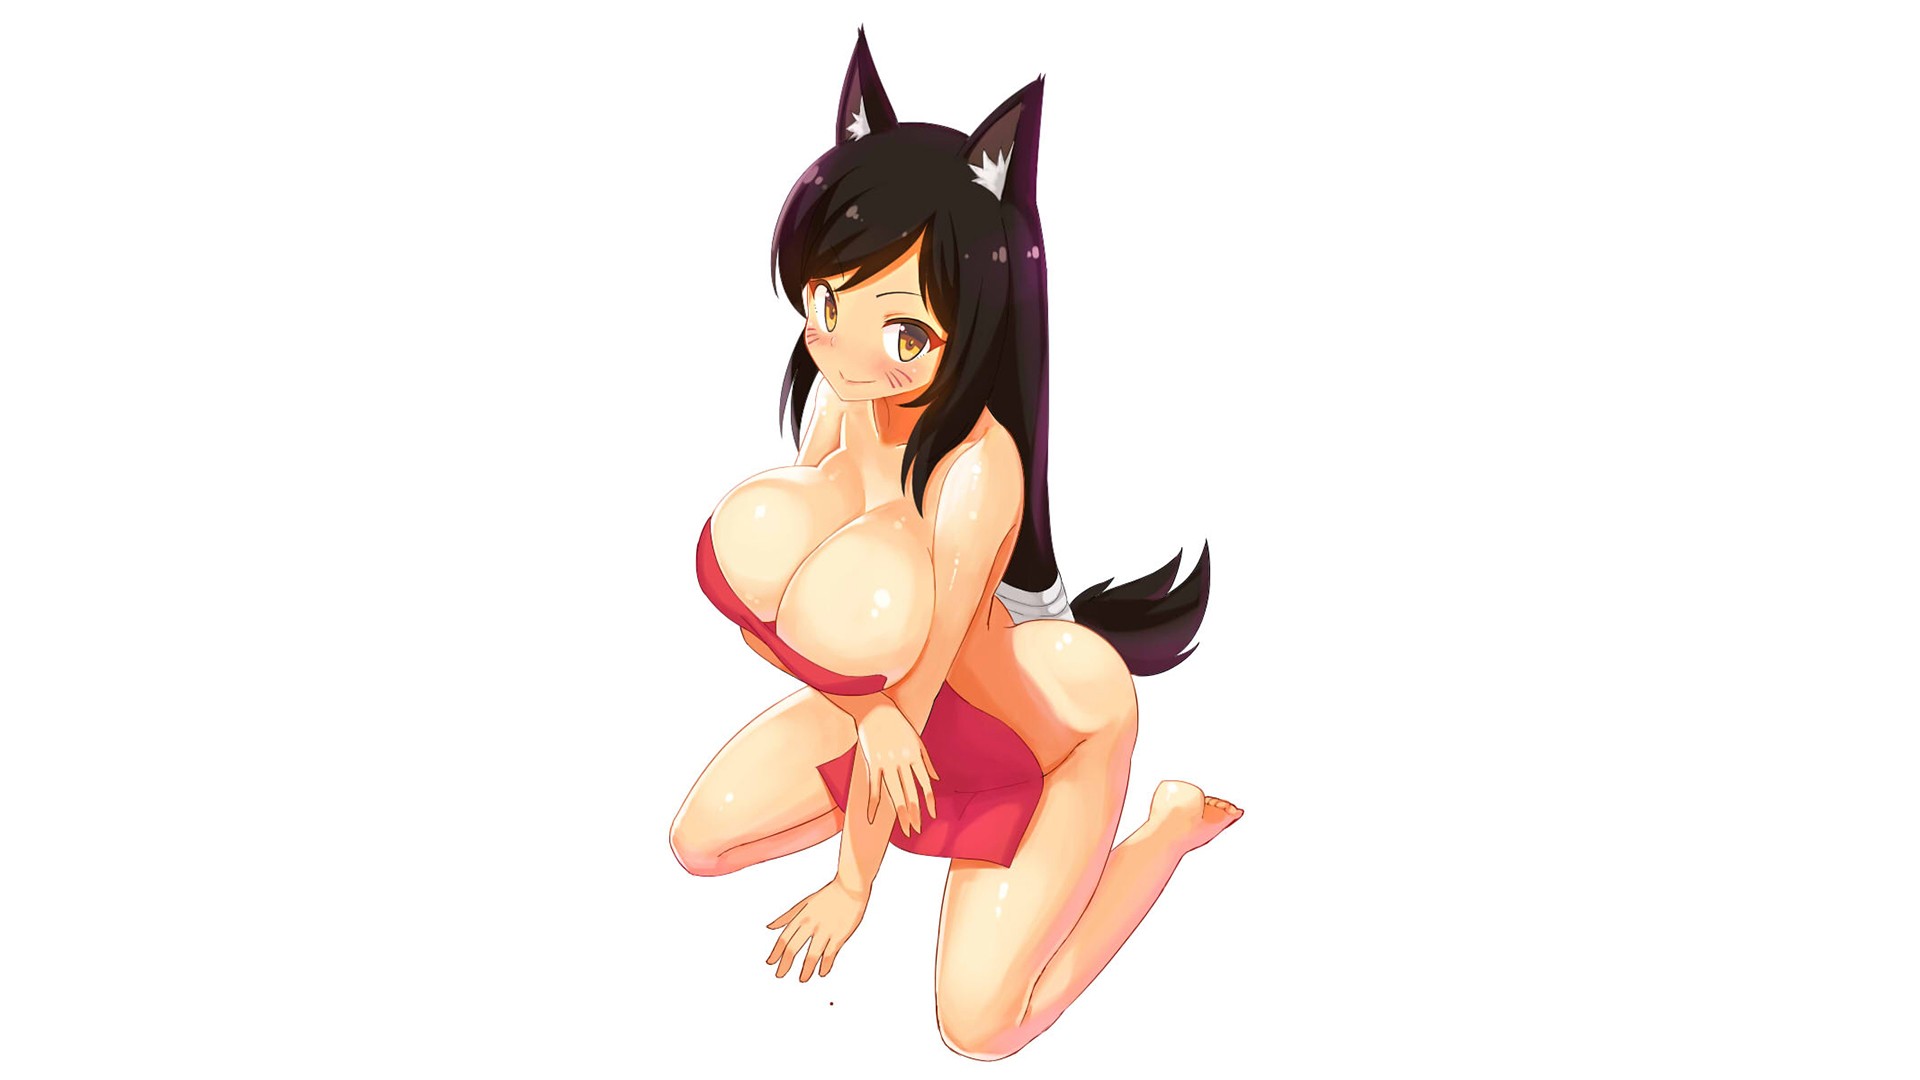 Anime 1920x1080 Ahri (League of Legends) League of Legends big boobs looking at viewer cat girl nude strategic covering towel kneeling cleavage anime girls boobs huge breasts curvy fan art smiling PC gaming video game girls dark hair anime